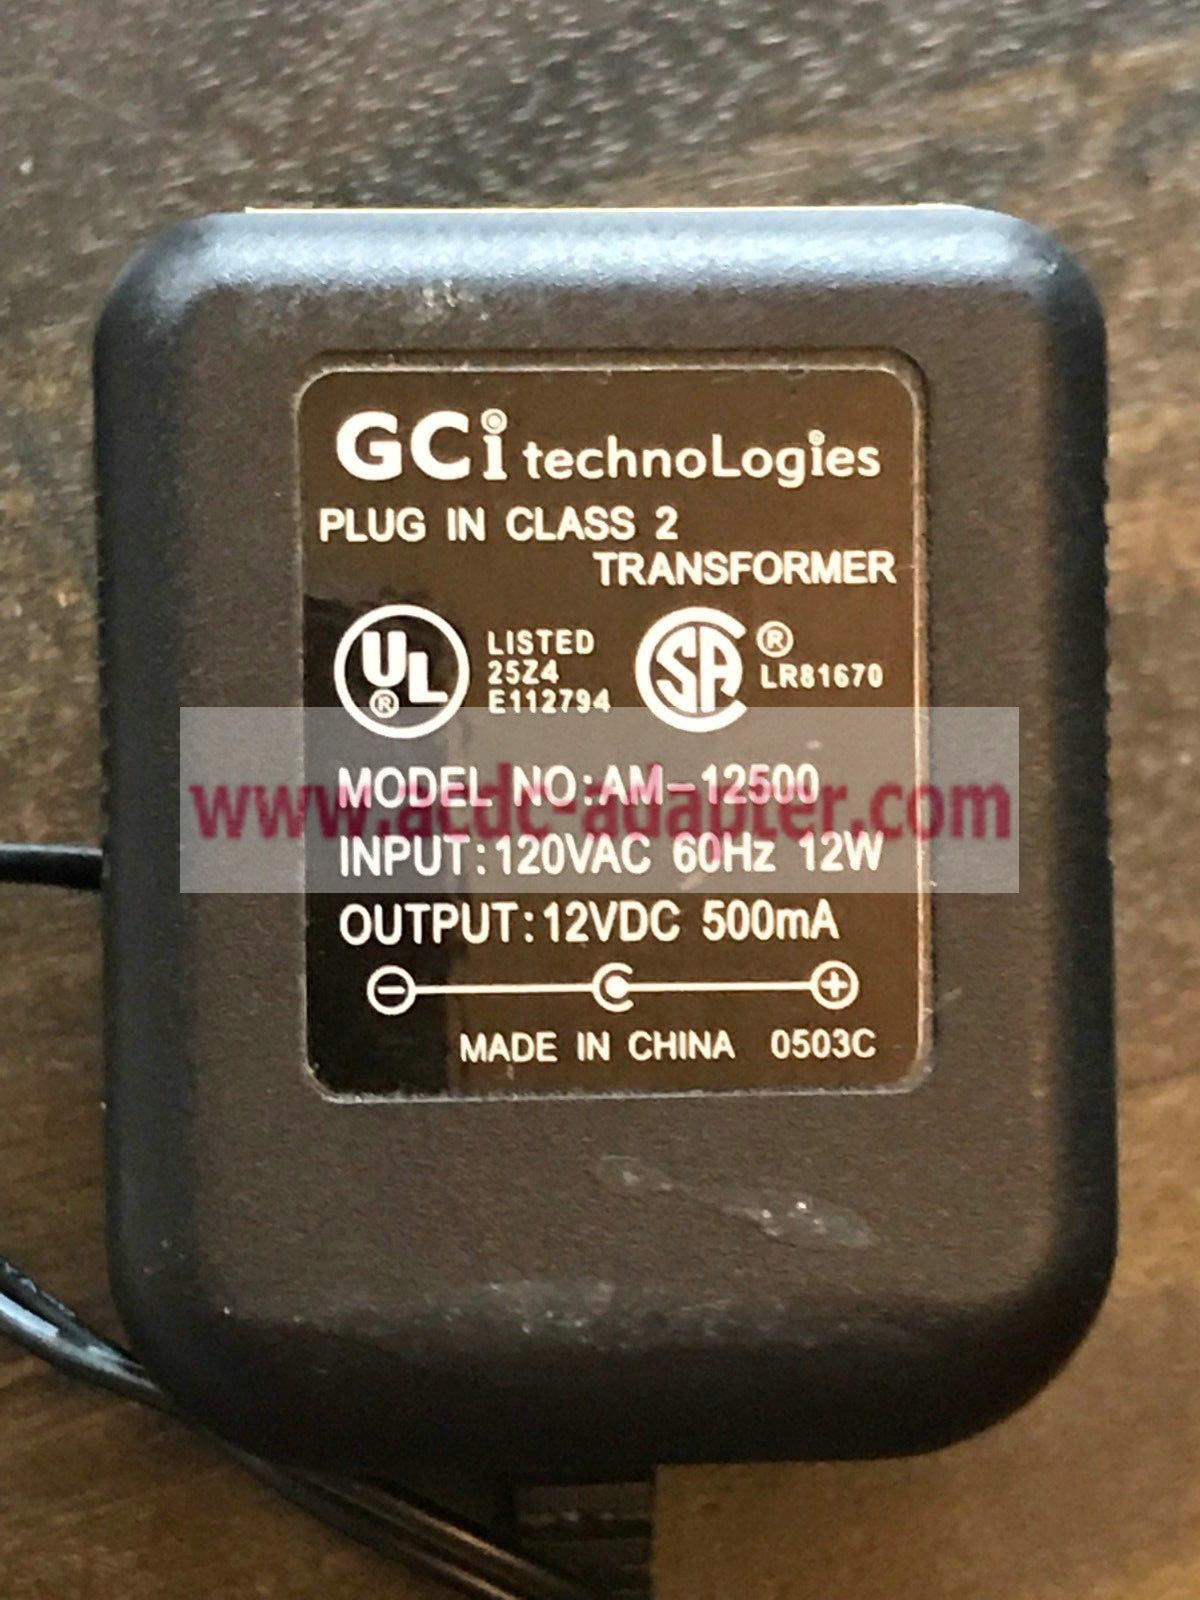 Brand new GCi AM-12500 12VDC 500mA Class 2 Plug-In Adapter Power Supply